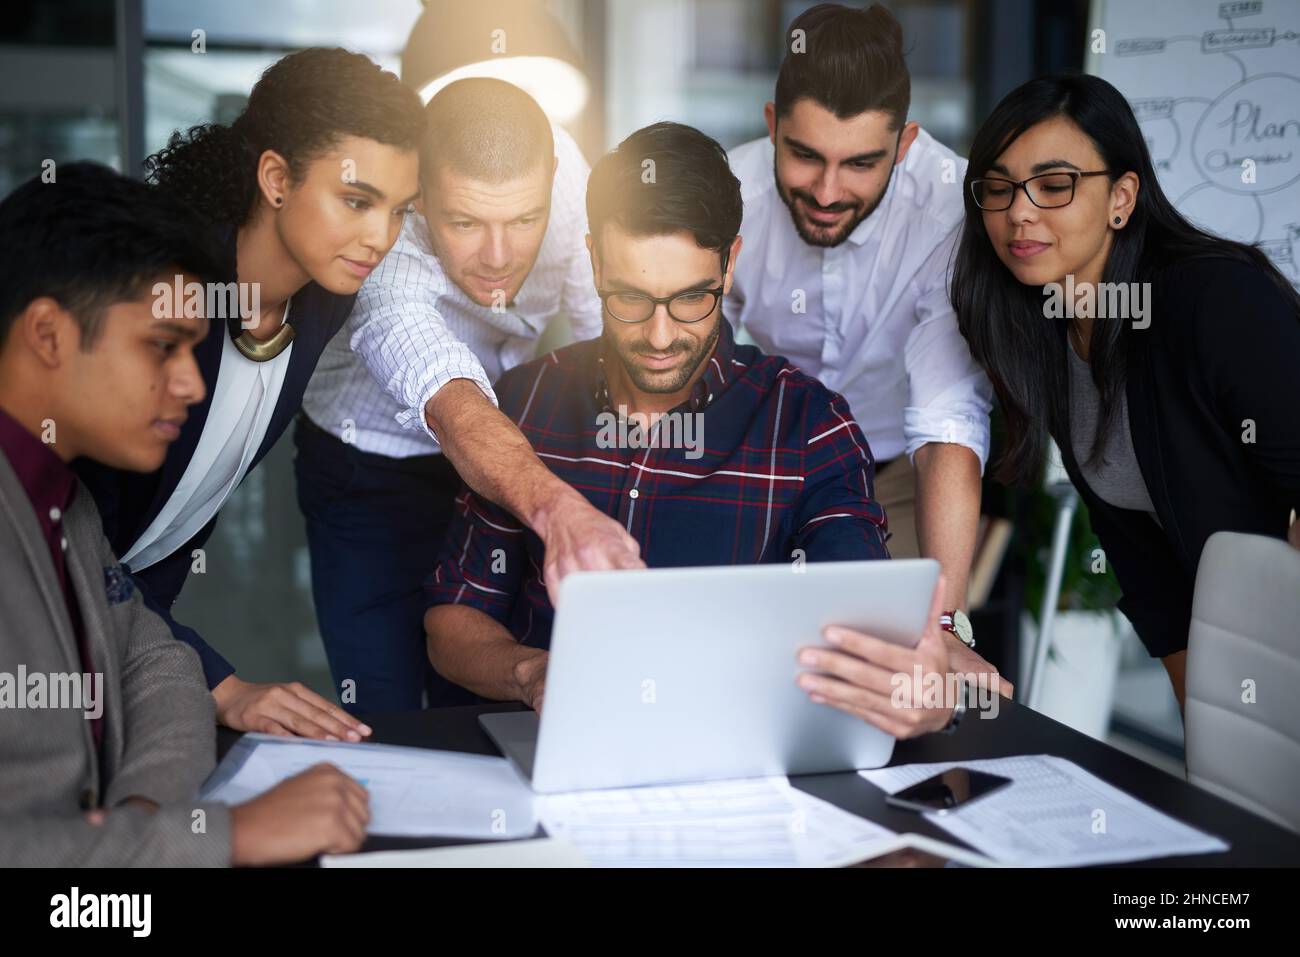 They work seamlessly together. Shot of a group of colleagues working ...